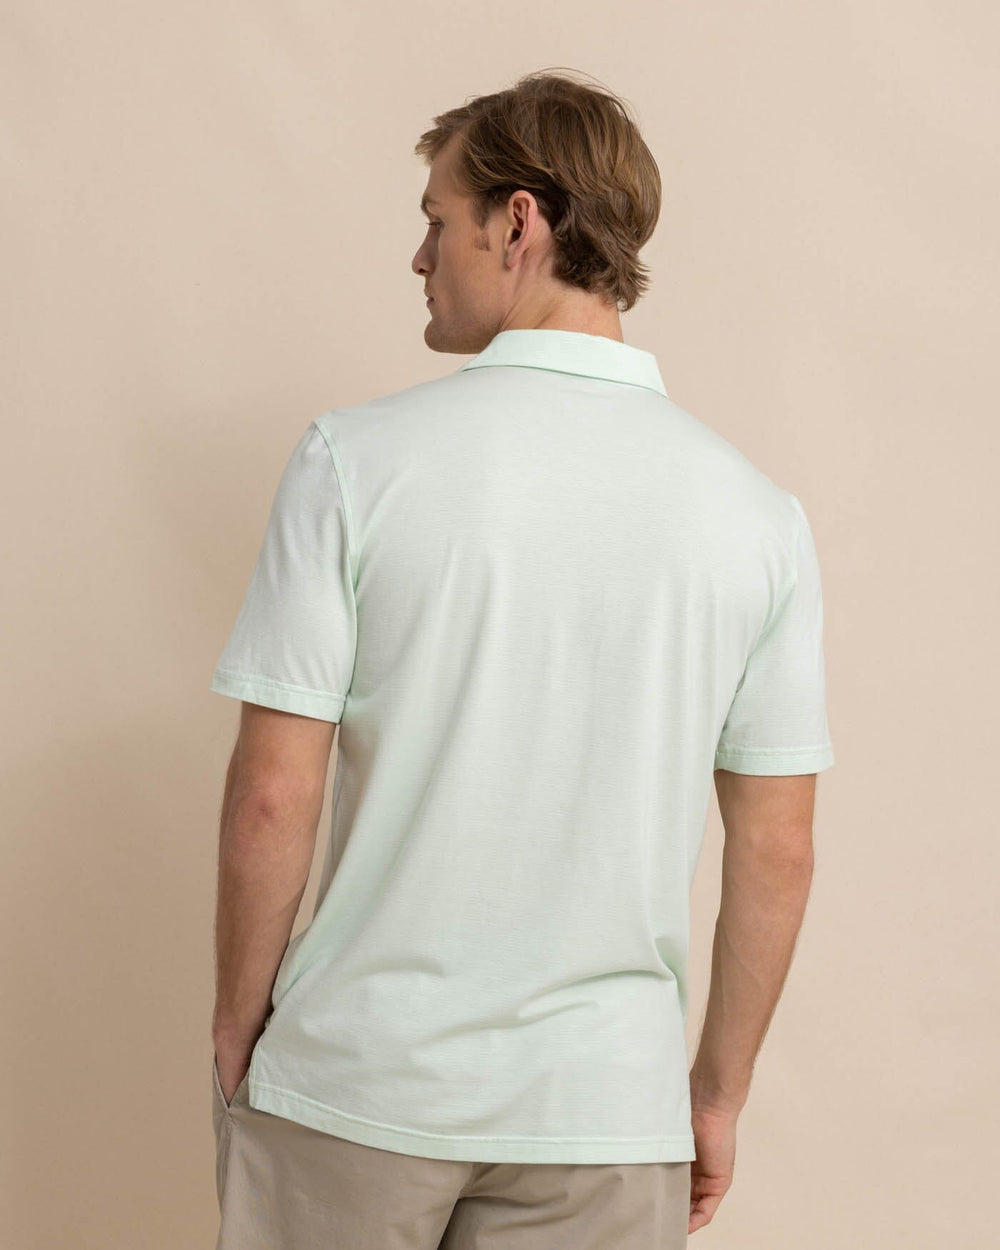 The back view of the Southern Tide The Seaport Davenport Stripe Polo by Southern Tide - Morning Mist Sage